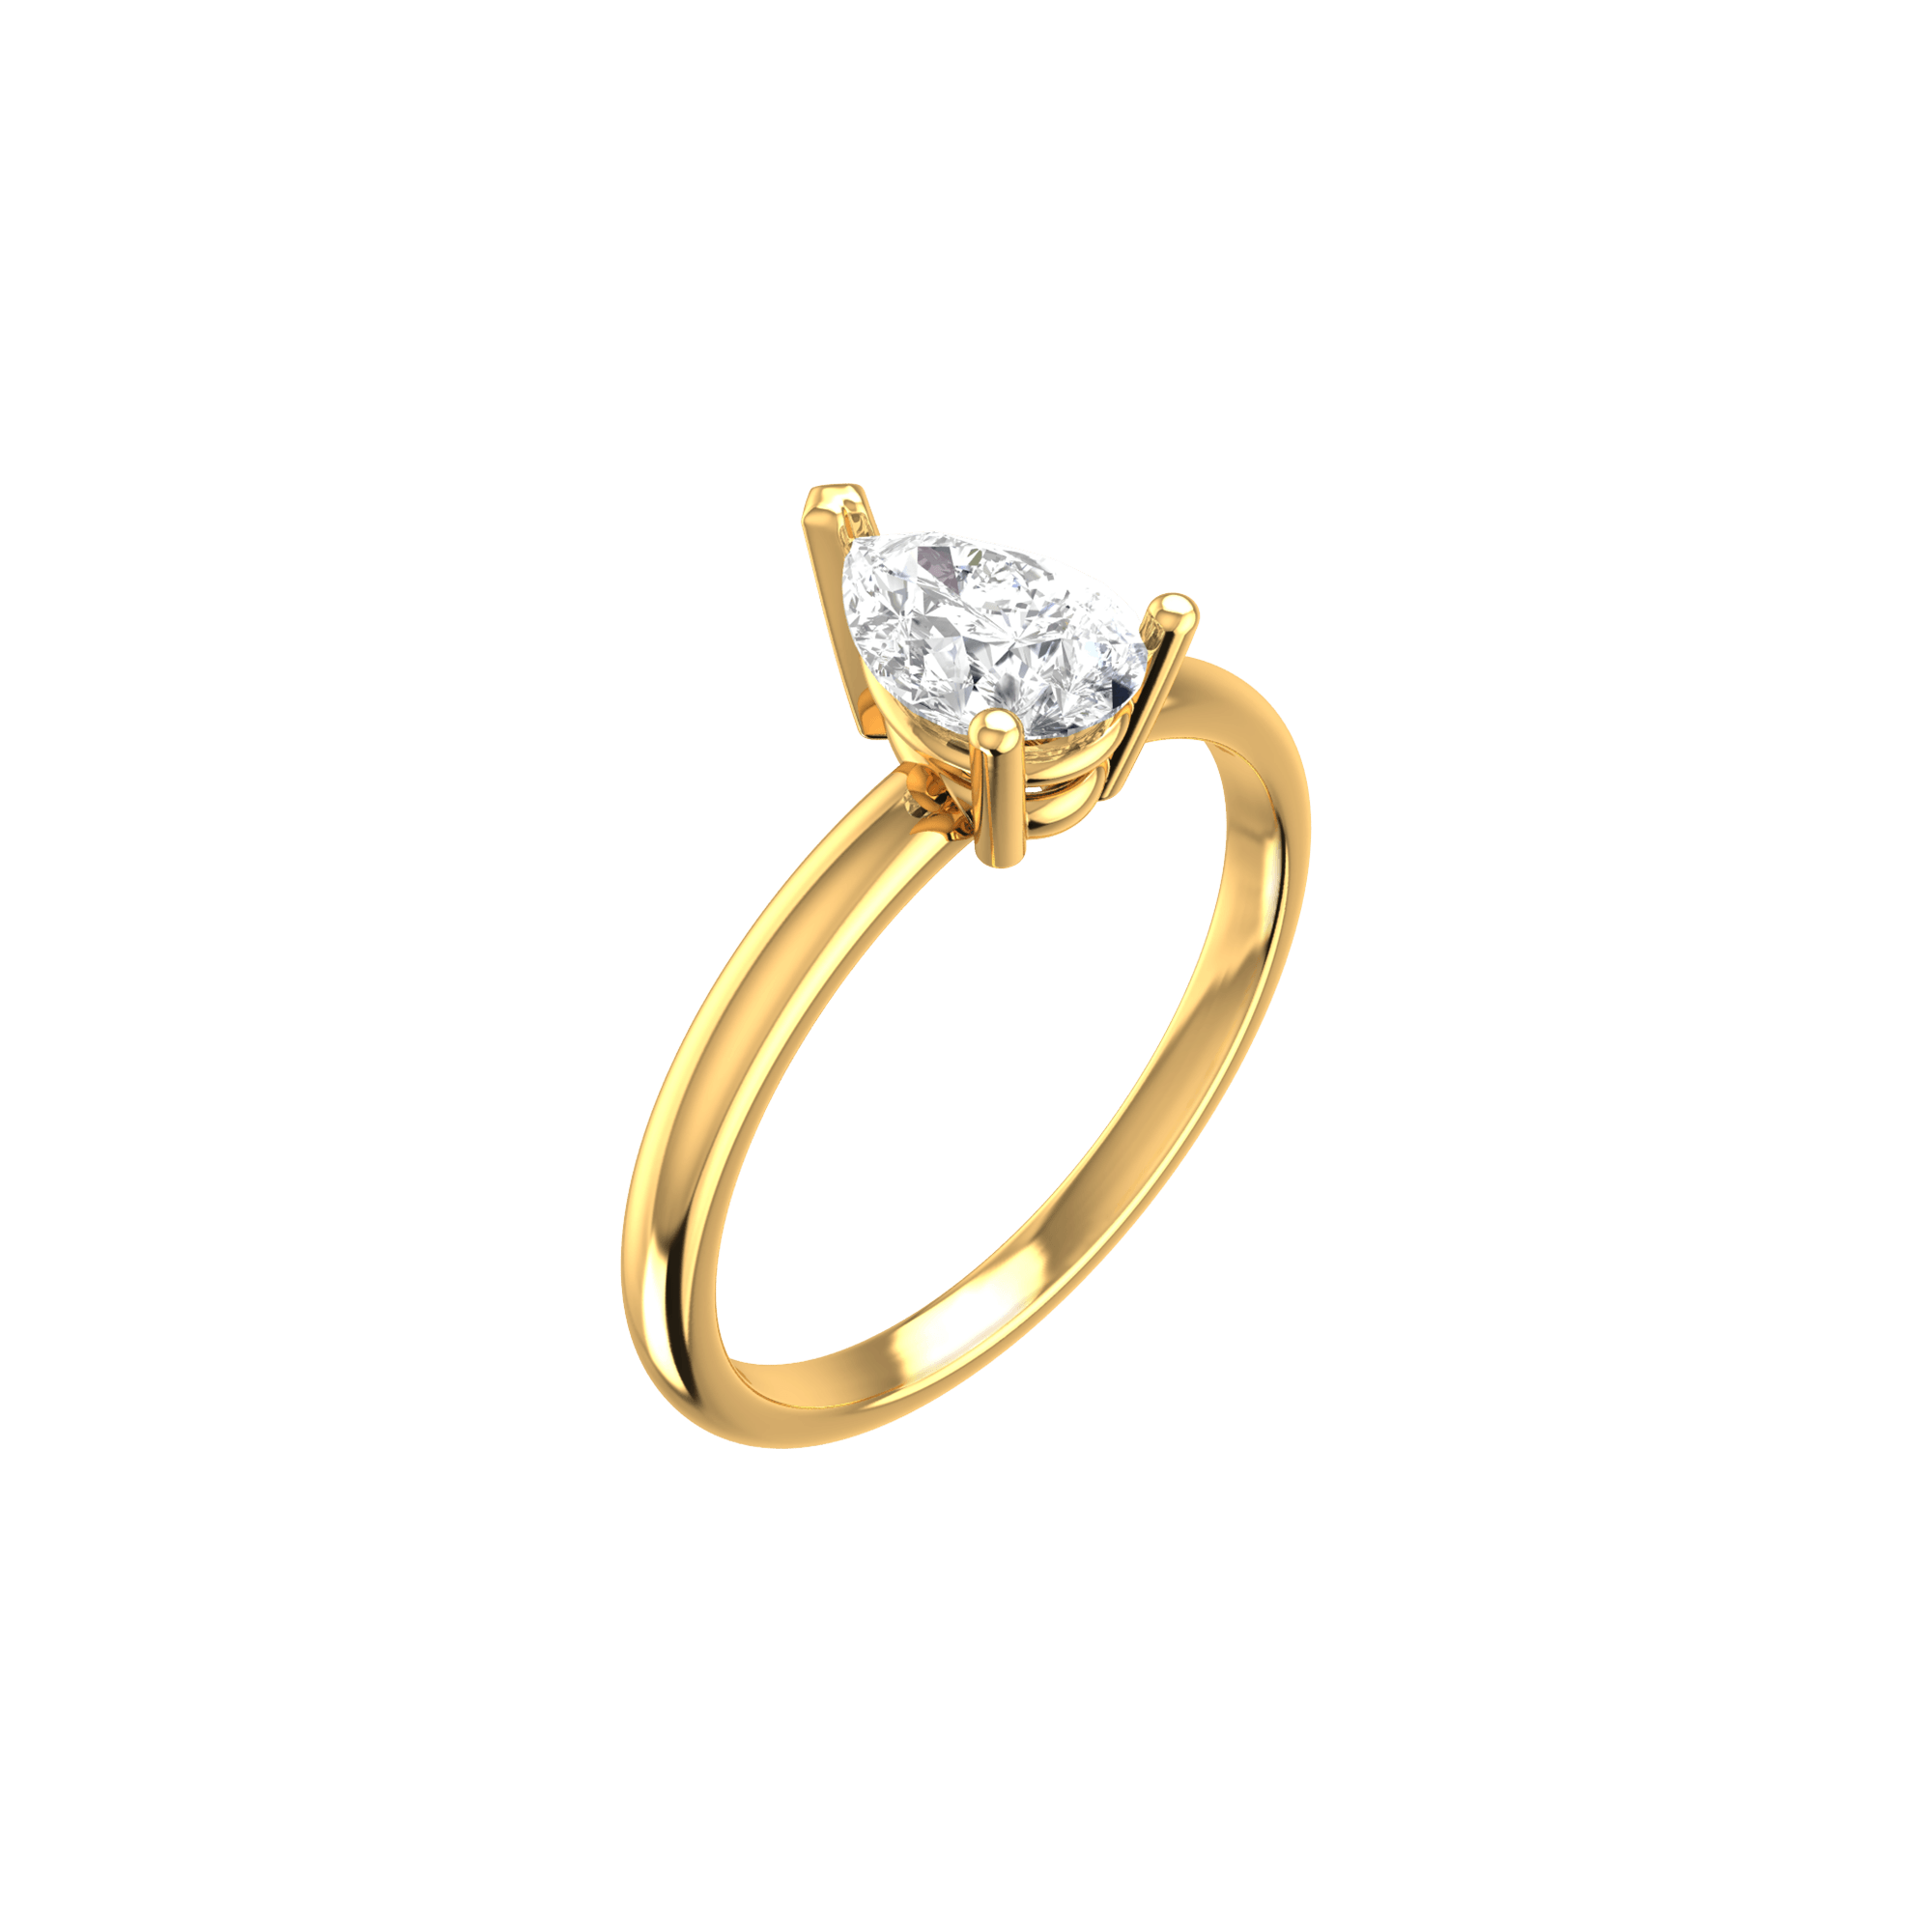 Pear Shaped Lab-Grown Diamond Solitaire Ring | 18K yellow gold / 6 / 0.6ct  | Jewelry | The Future Rocks